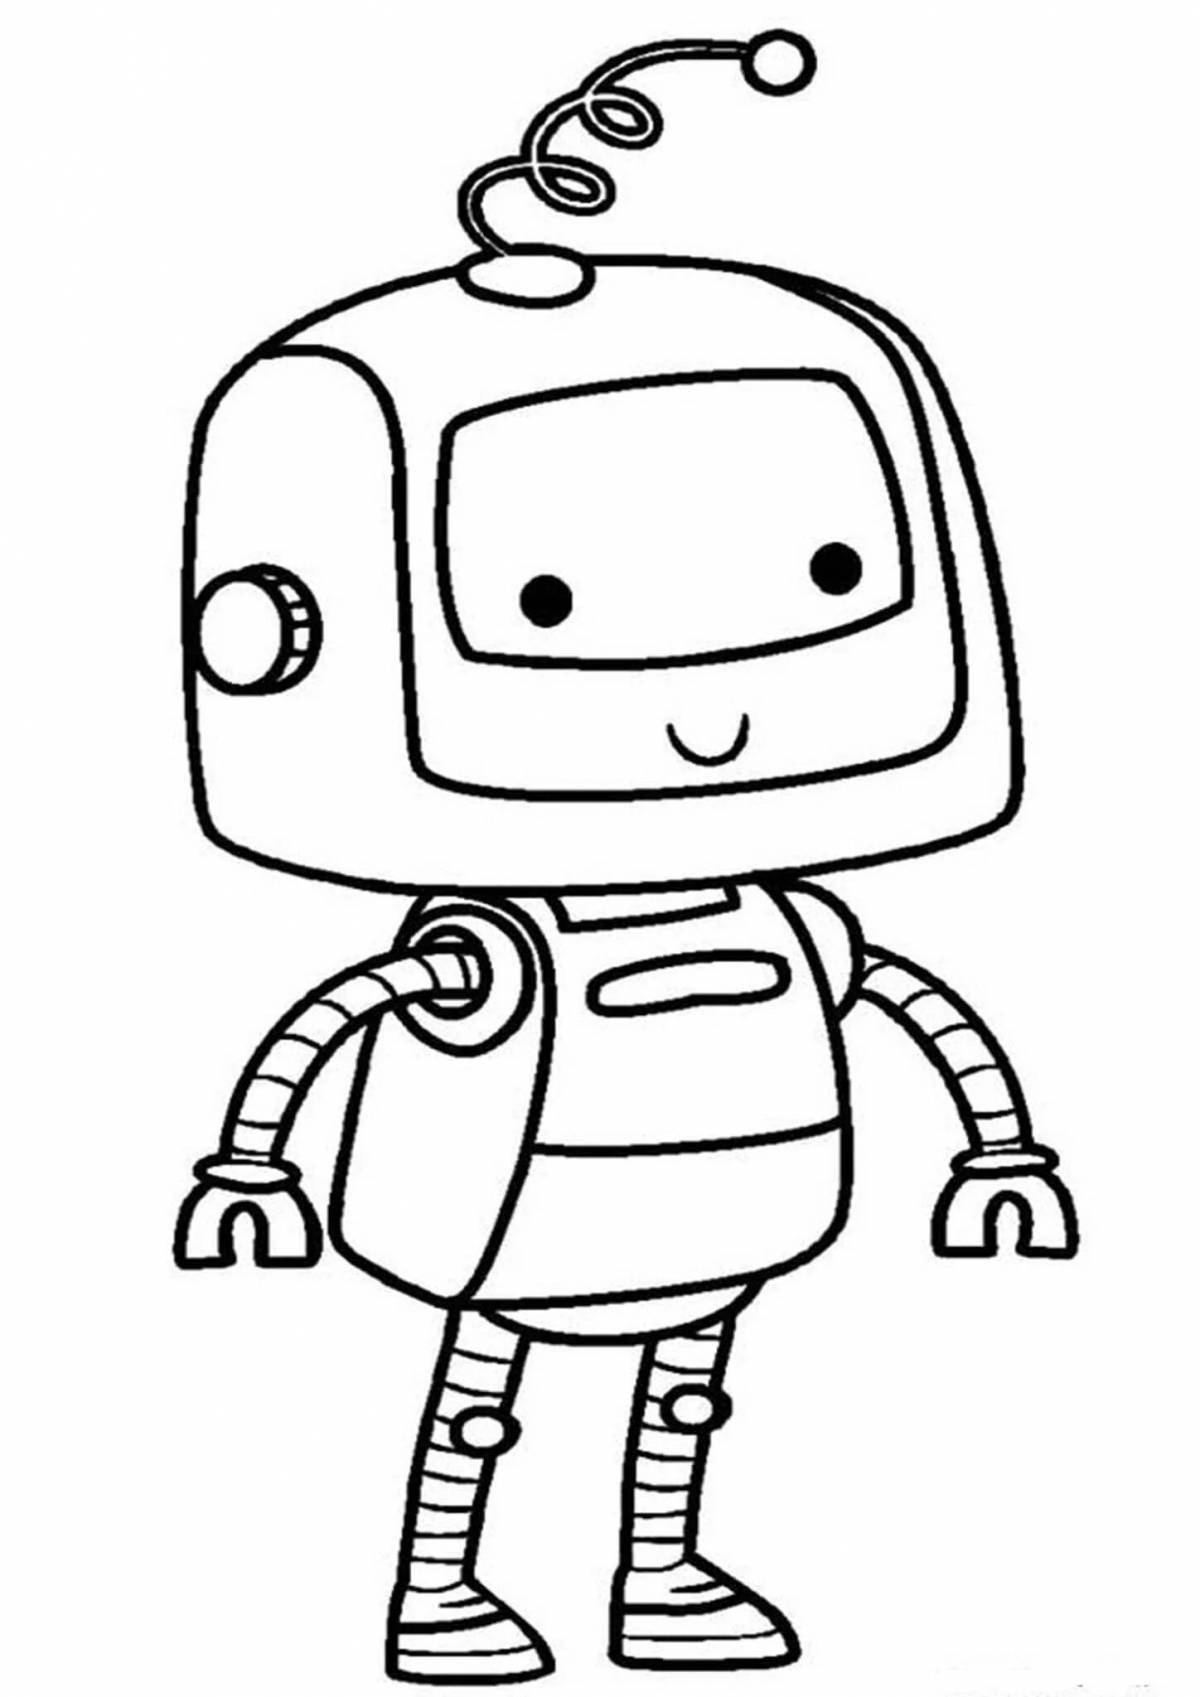 Amazing robot coloring pages for 5-7 year olds